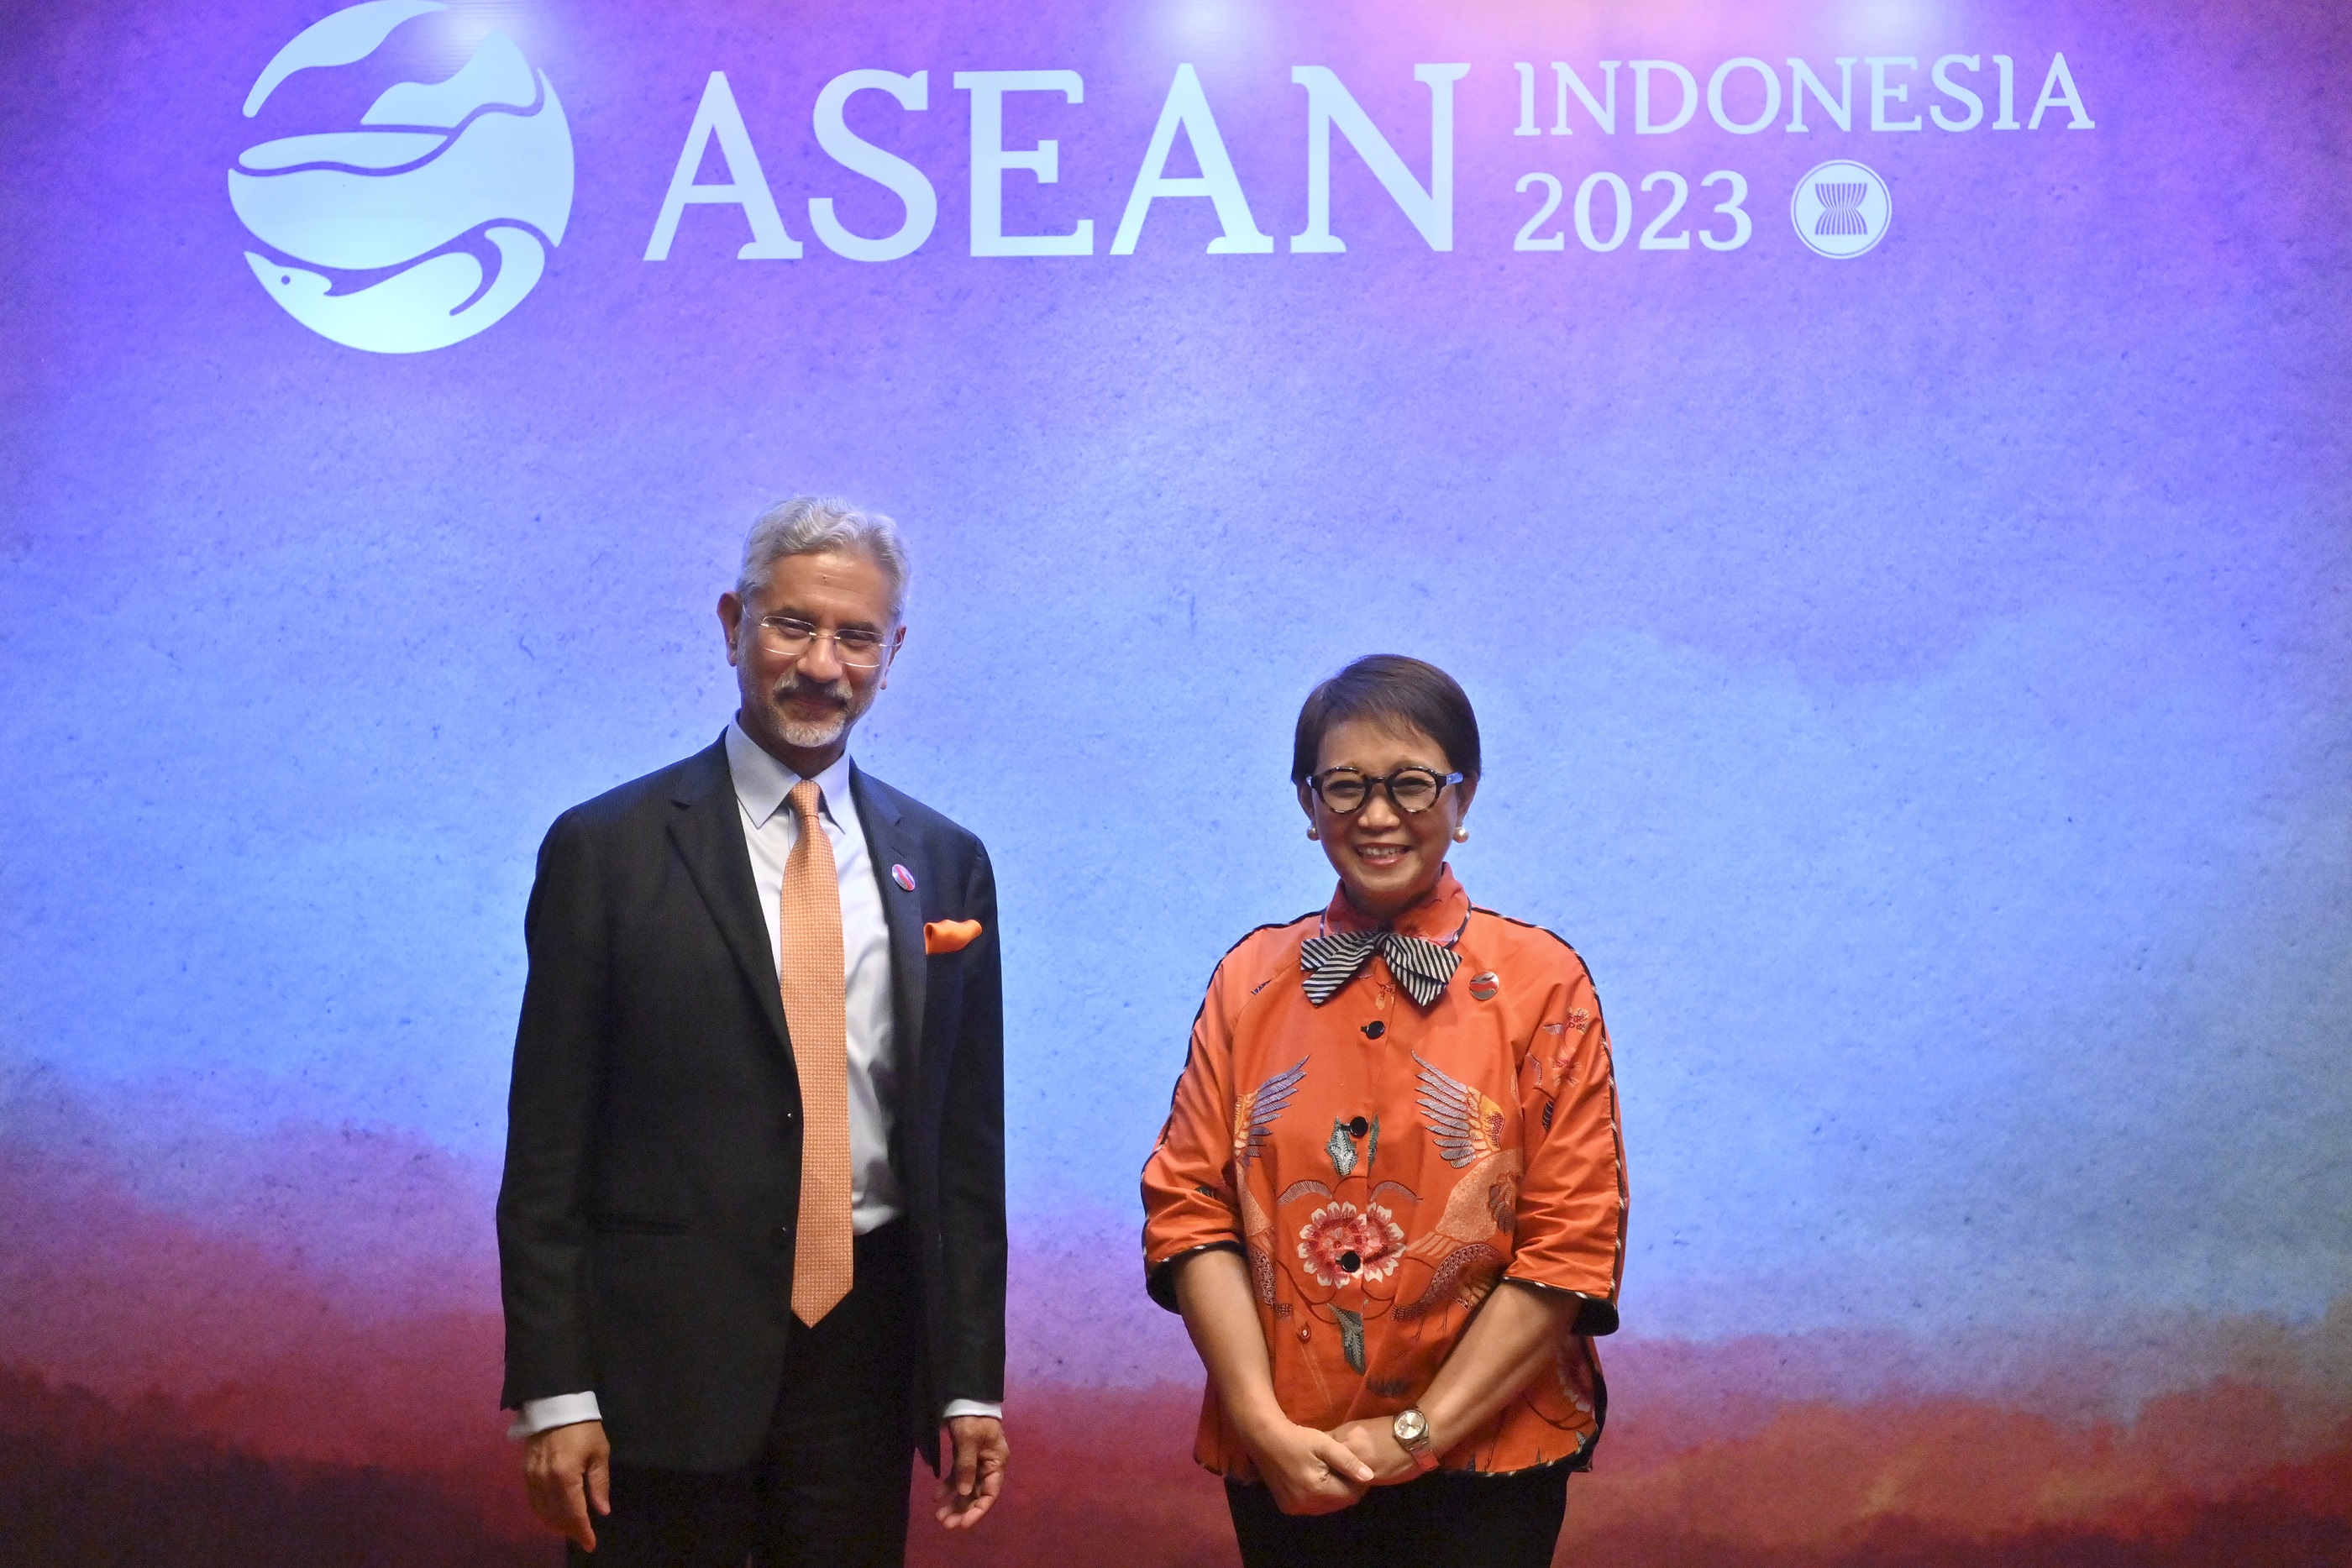 Indonesian Foreign Minister Meet Indian Foreign Minister to Discuss Myanmar and G20